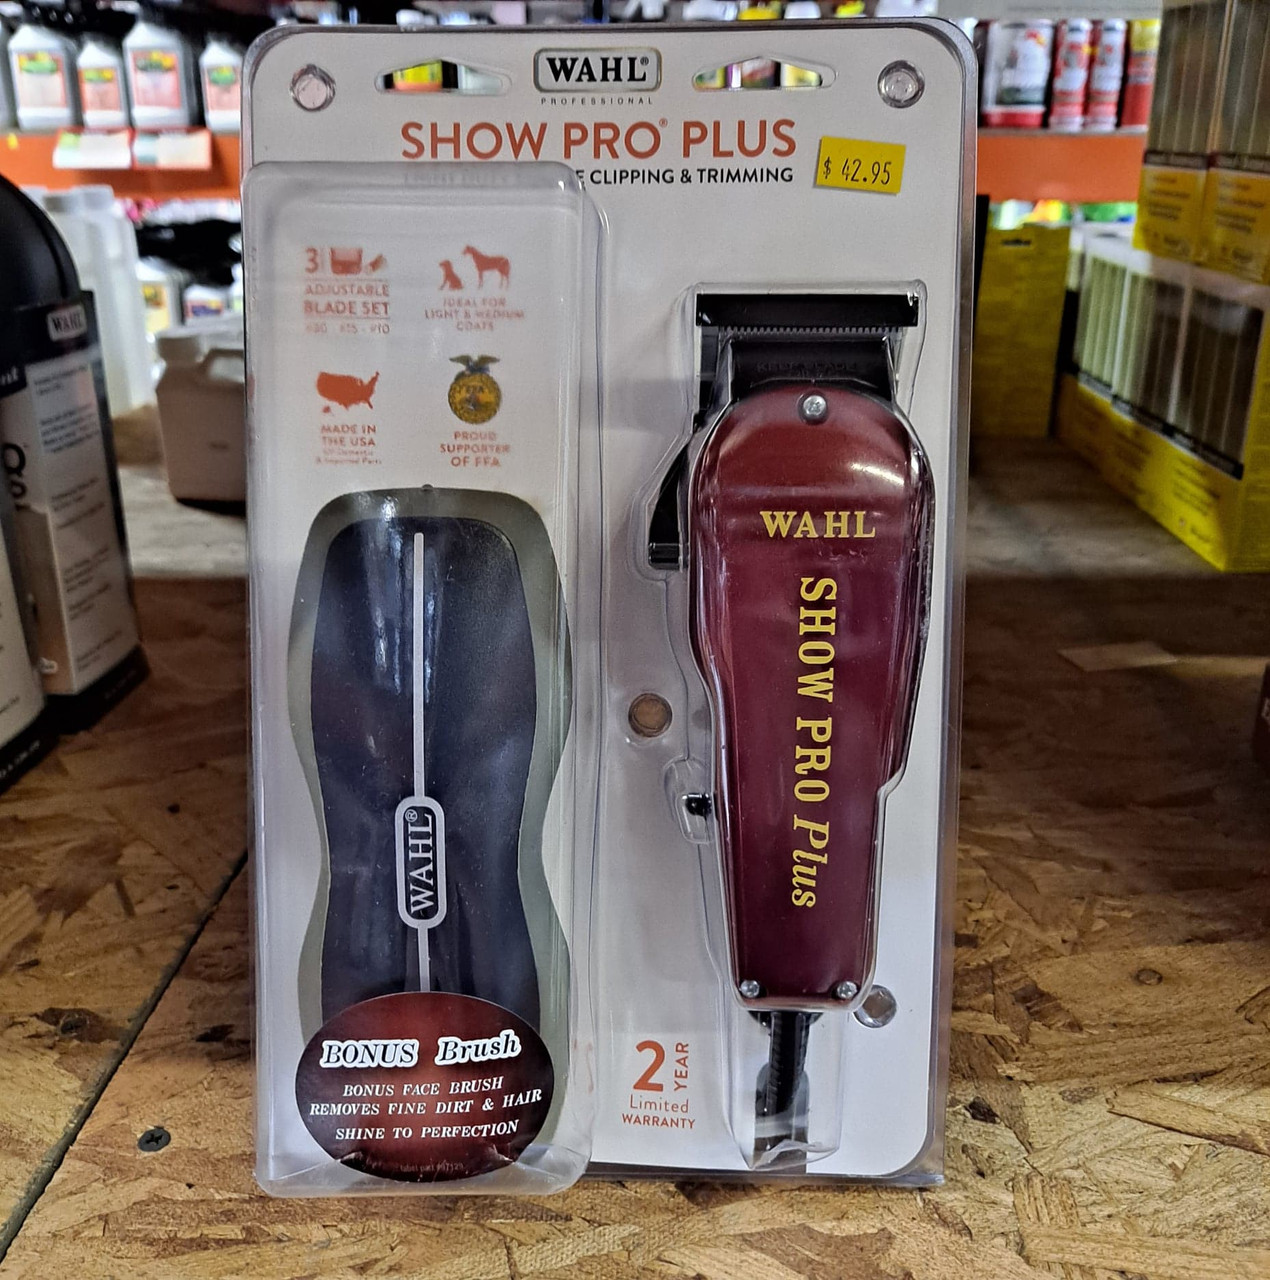 Wahl Show Pro Plus Clippers(4401)